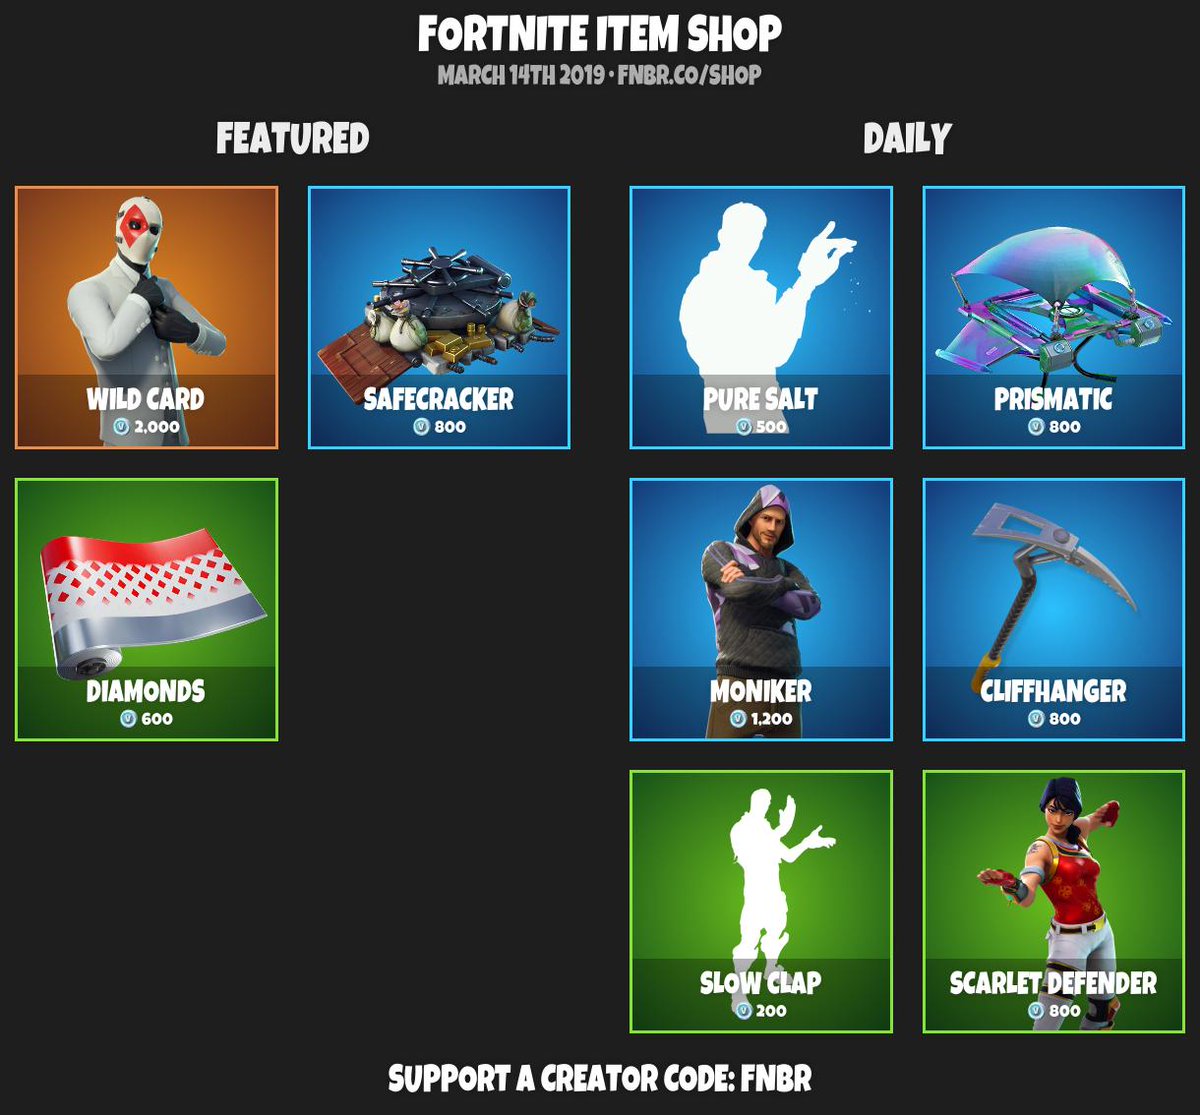 5 04 pm 13 mar 2019 - what is in the item shop in fortnite today